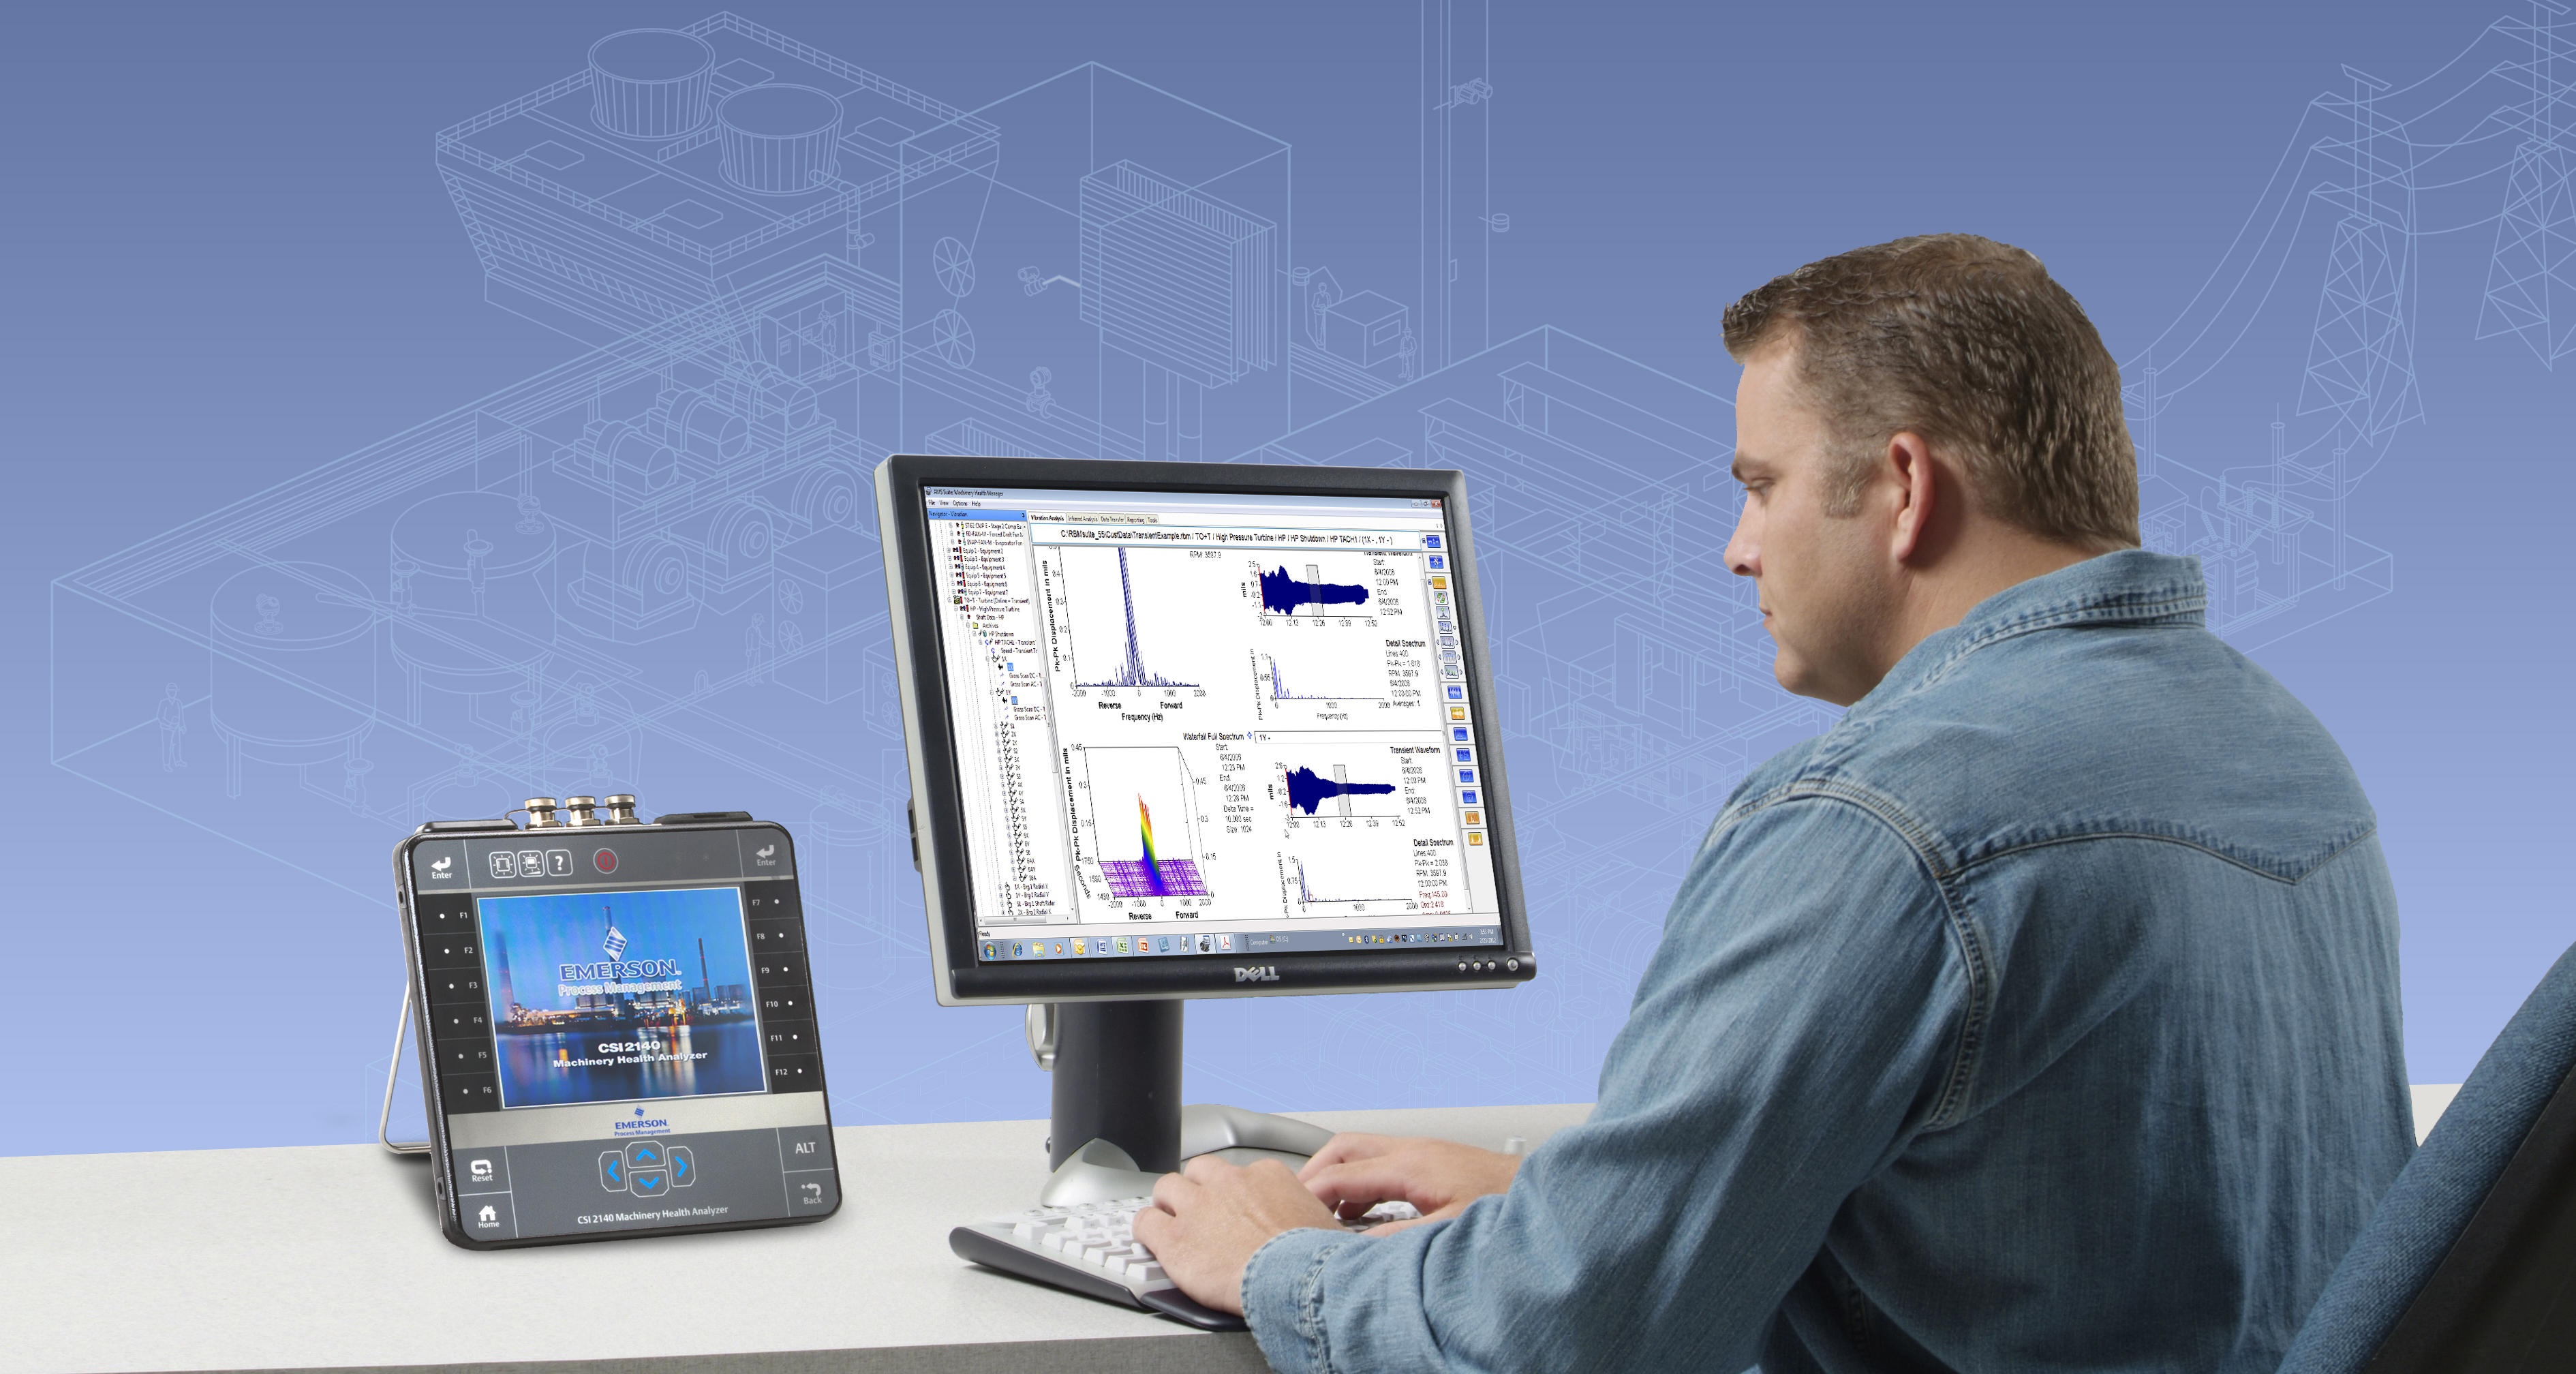 emerson site manager software download